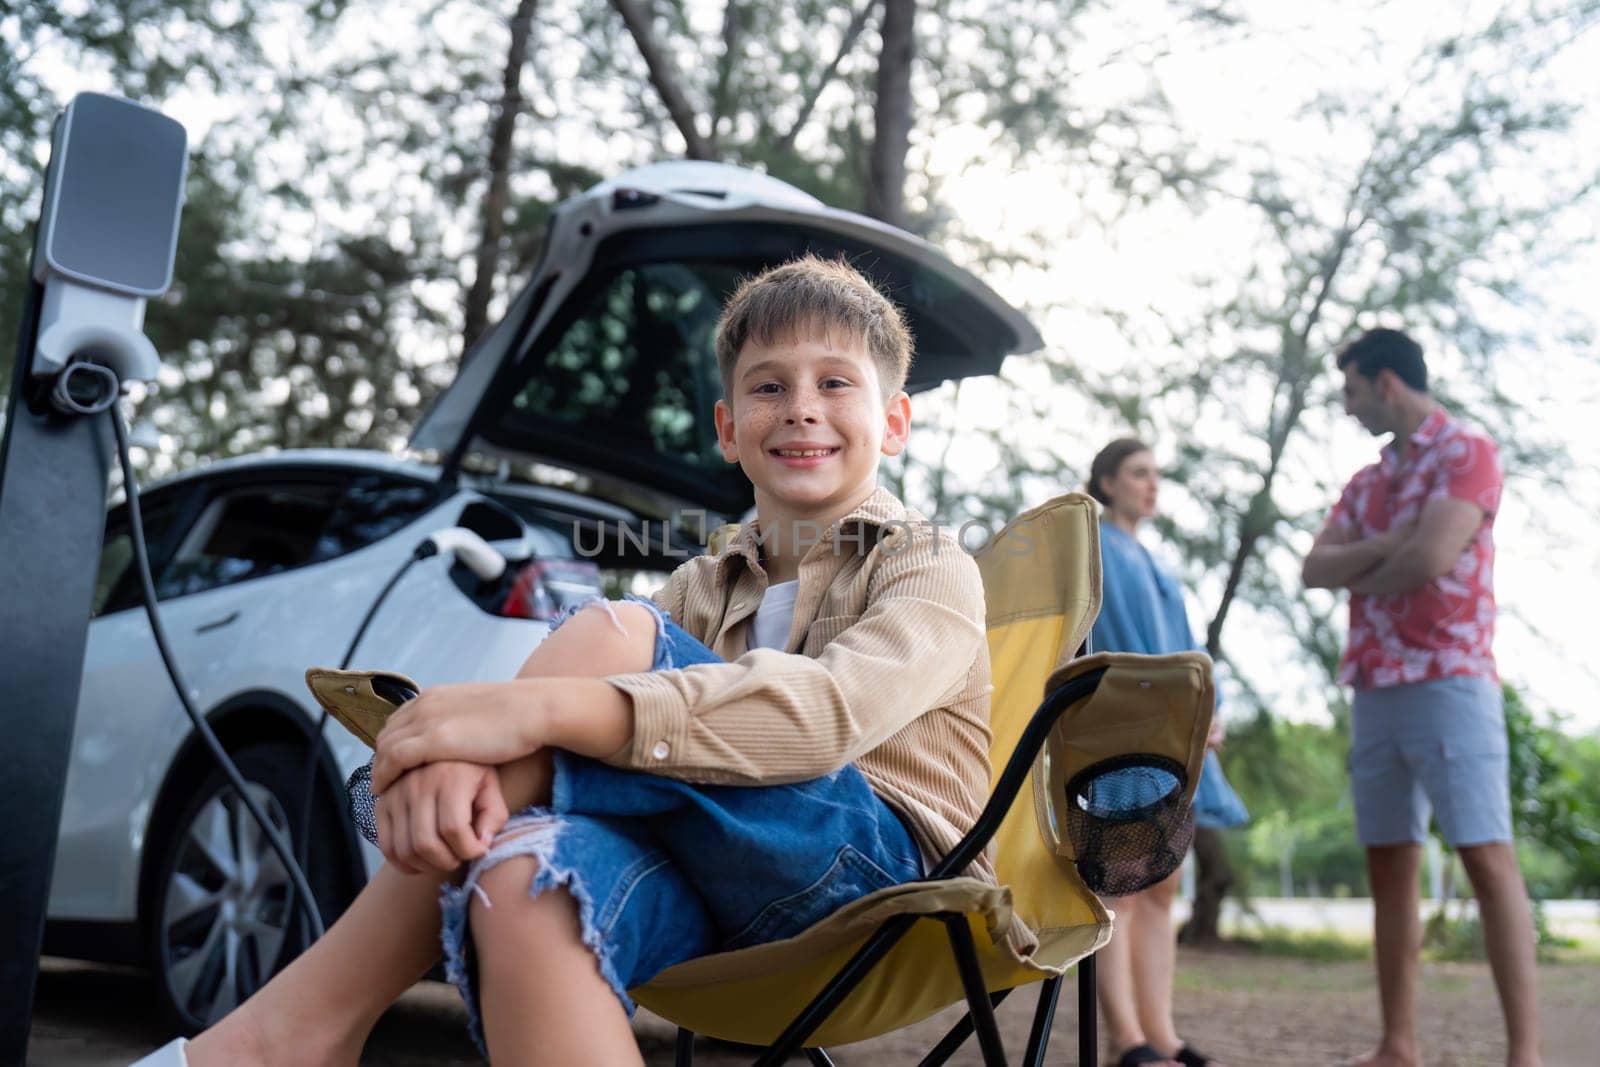 Little boy portrait sitting on camping chair with his family in background. Road trip travel with alternative energy charging station for eco-friendly car concept. Perpetual